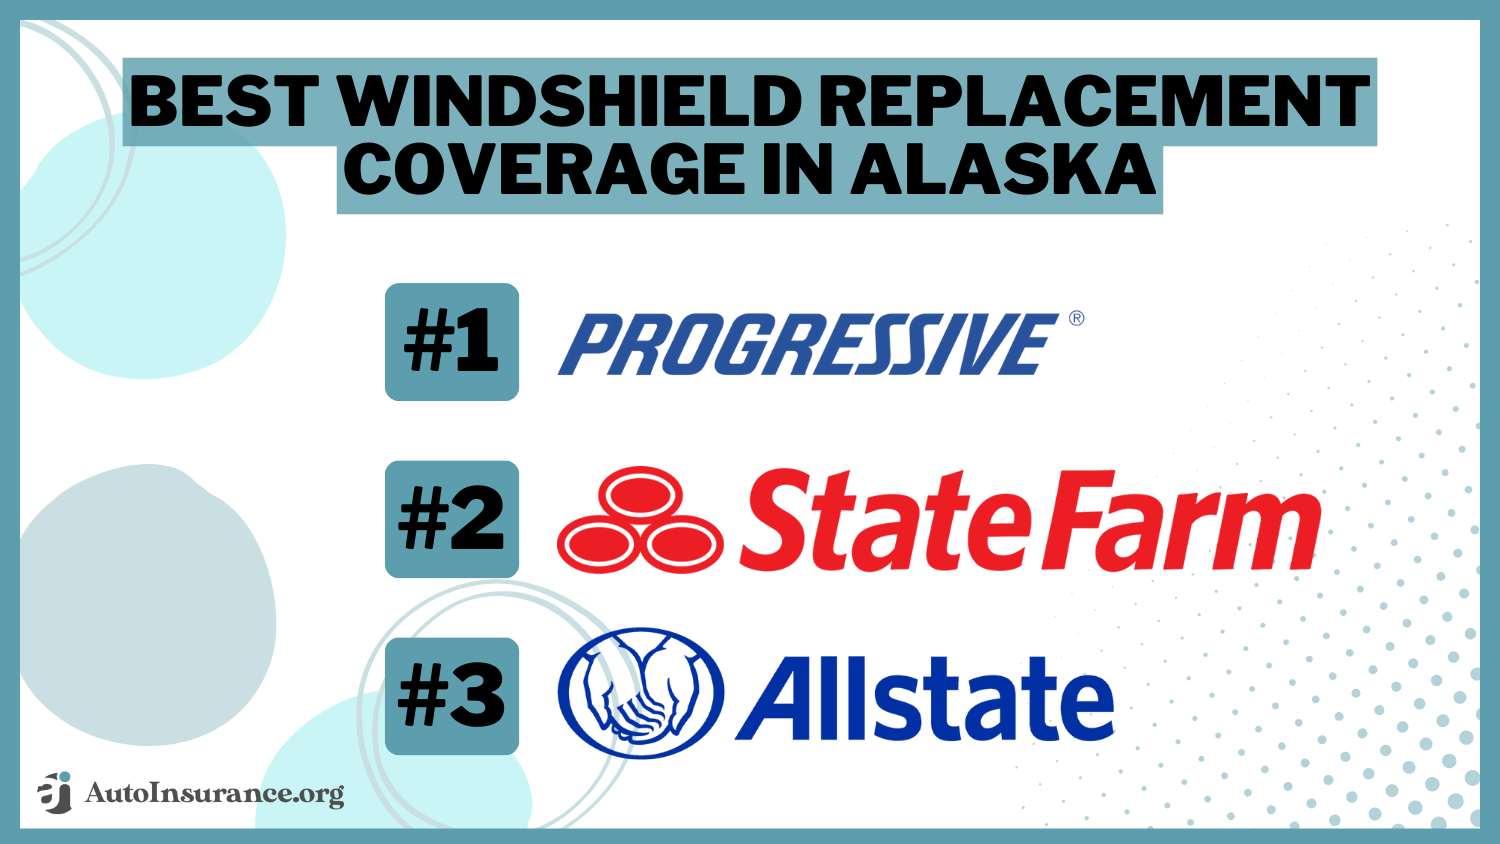 Best Windshield Replacement Coverage in Alaska: Progressive, State Farm, and Allstate